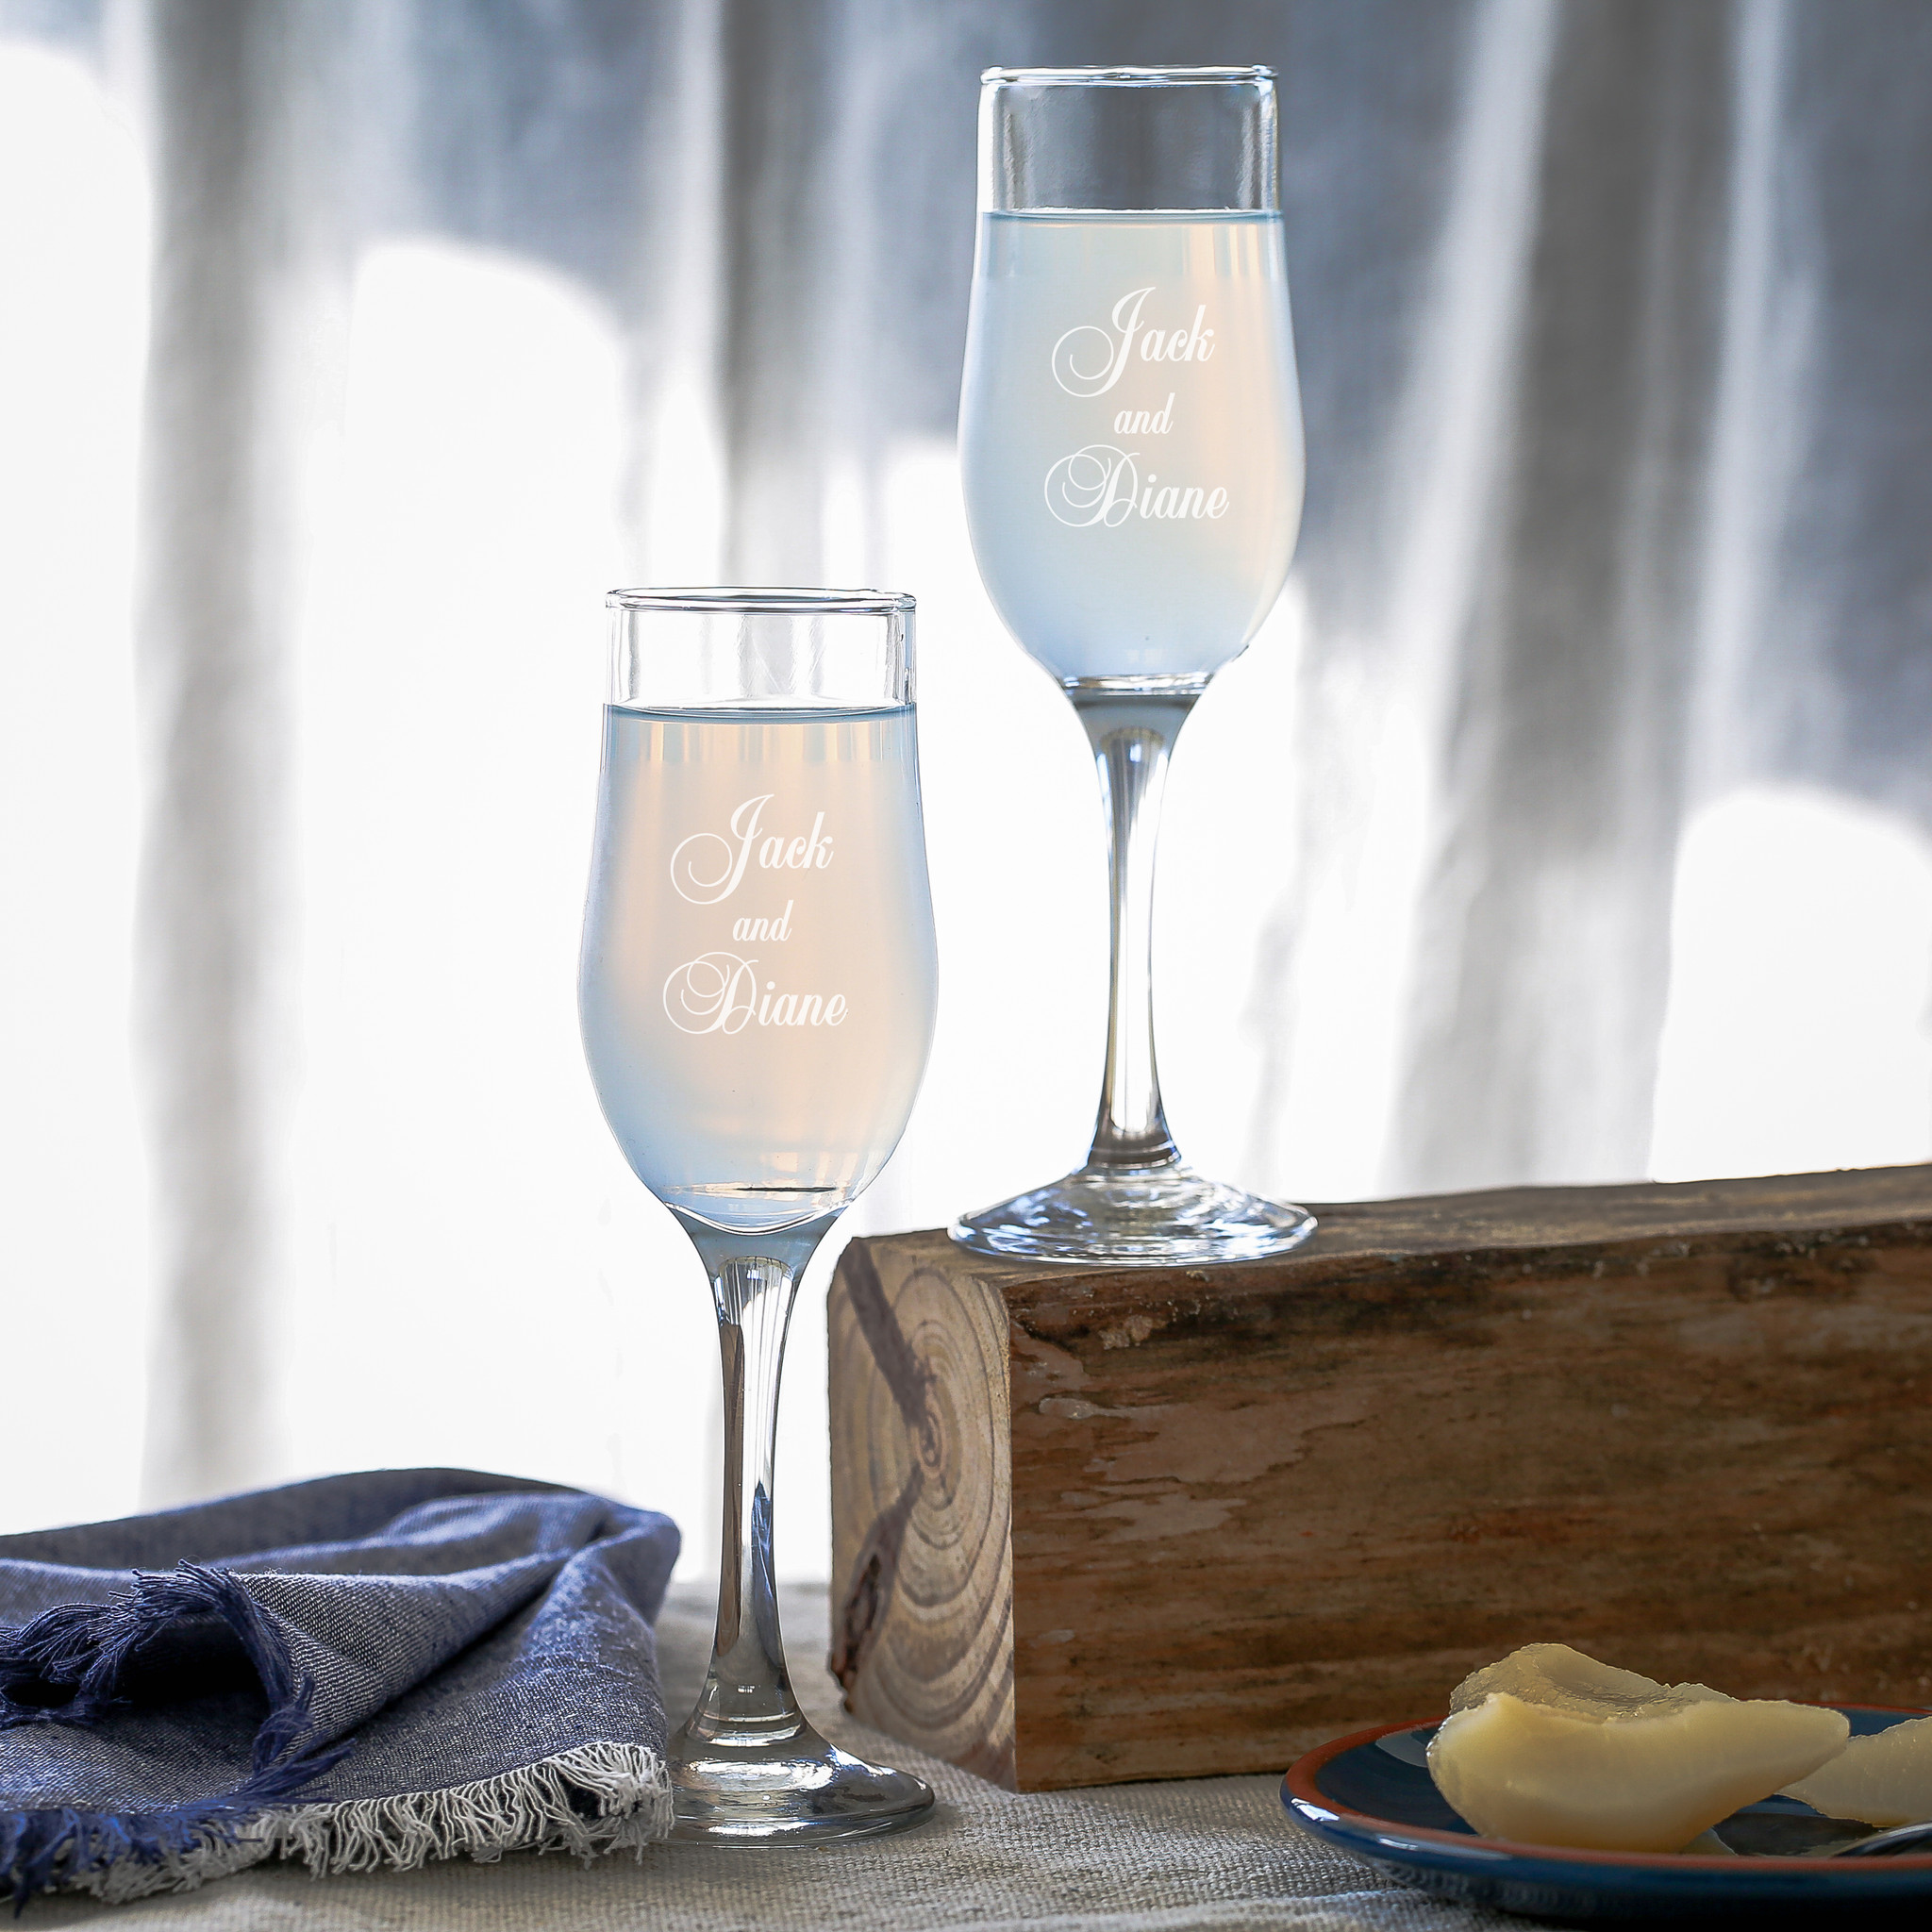 Write Your Own Personalized Stemless Champagne Flute